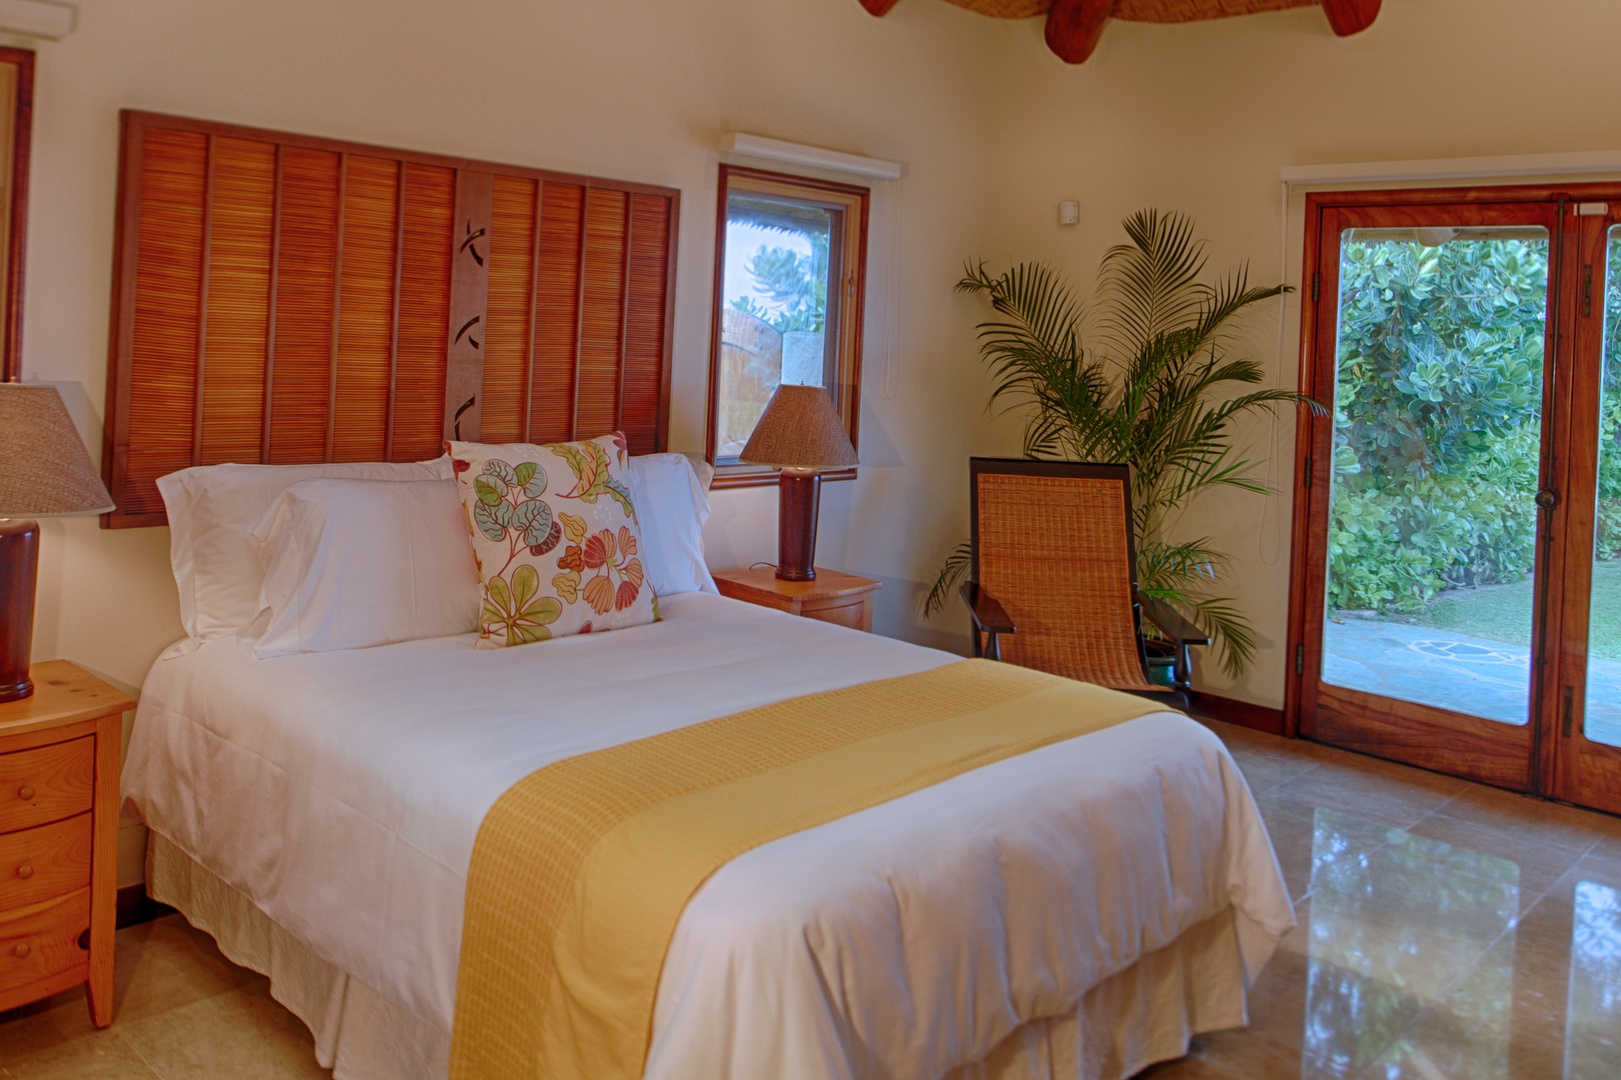 Kailua Vacation Rentals, Paul Mitchell Estate* - Bedroom 5 in Guest house